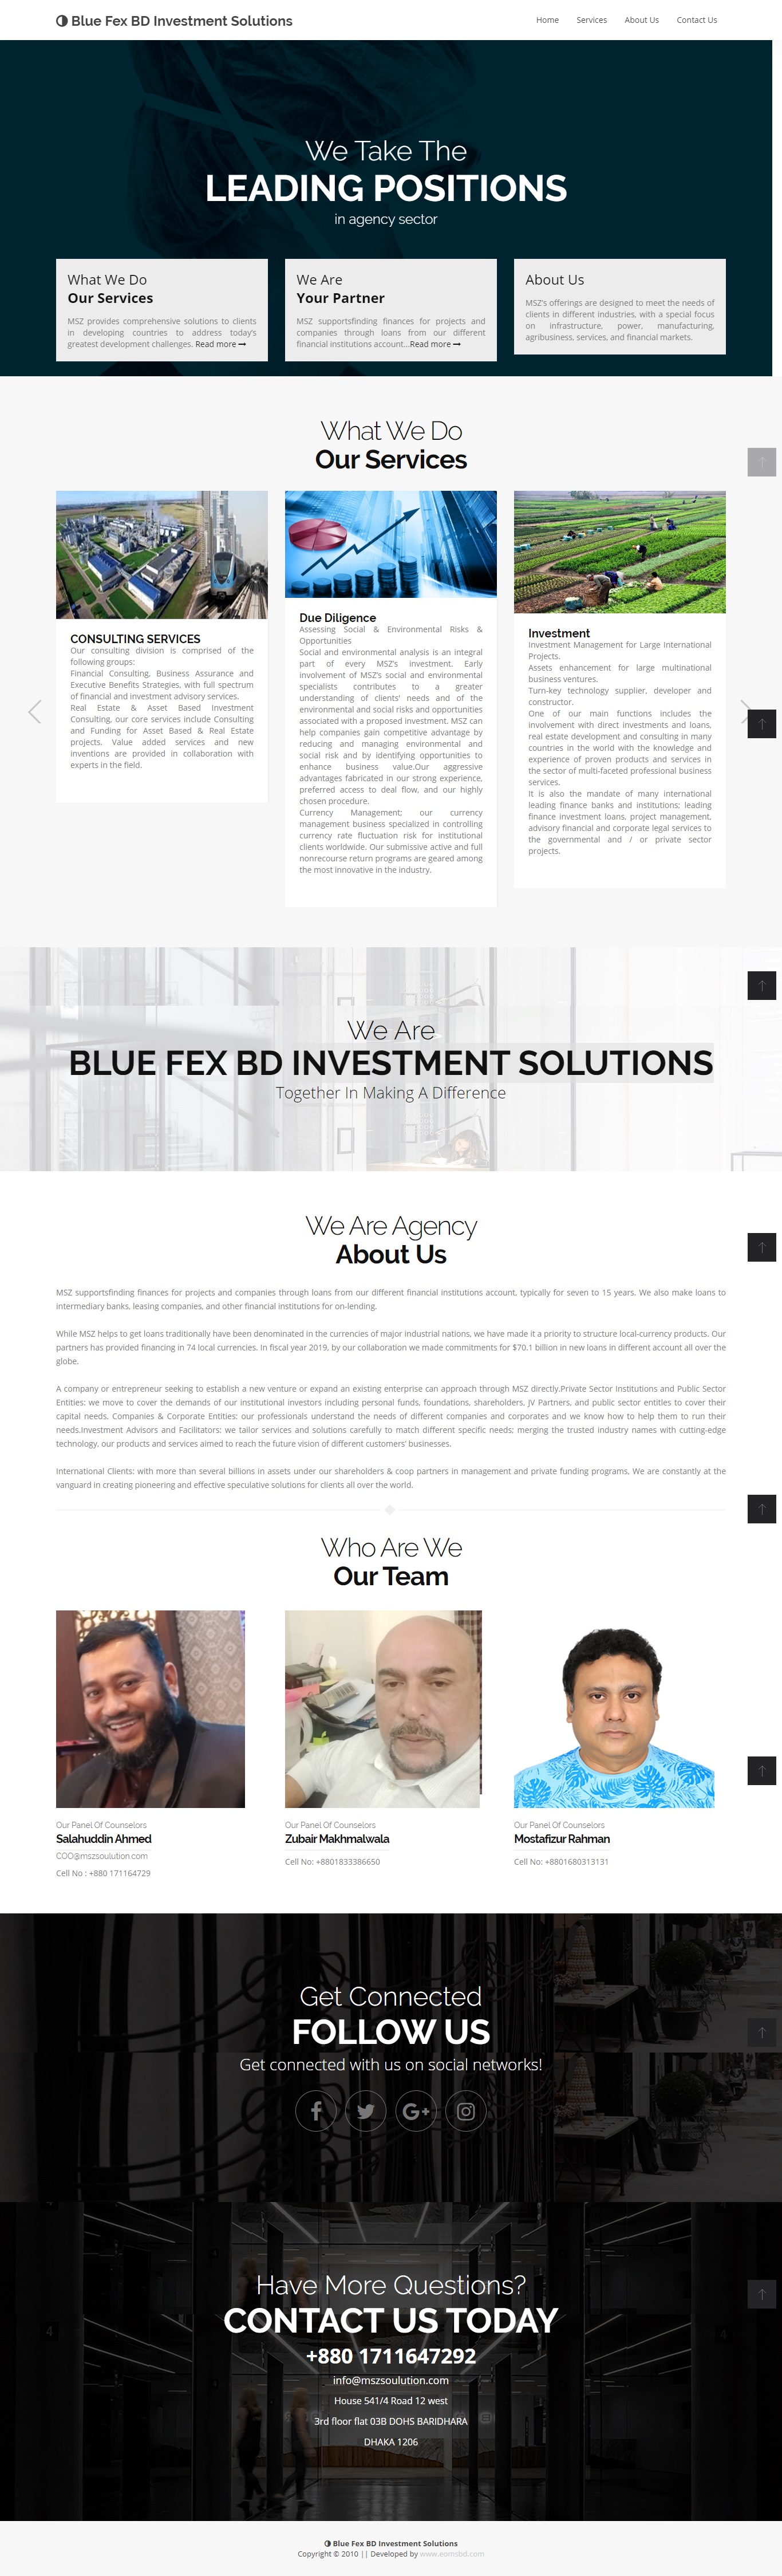 We Are Blue Fex BD Investment Solutions